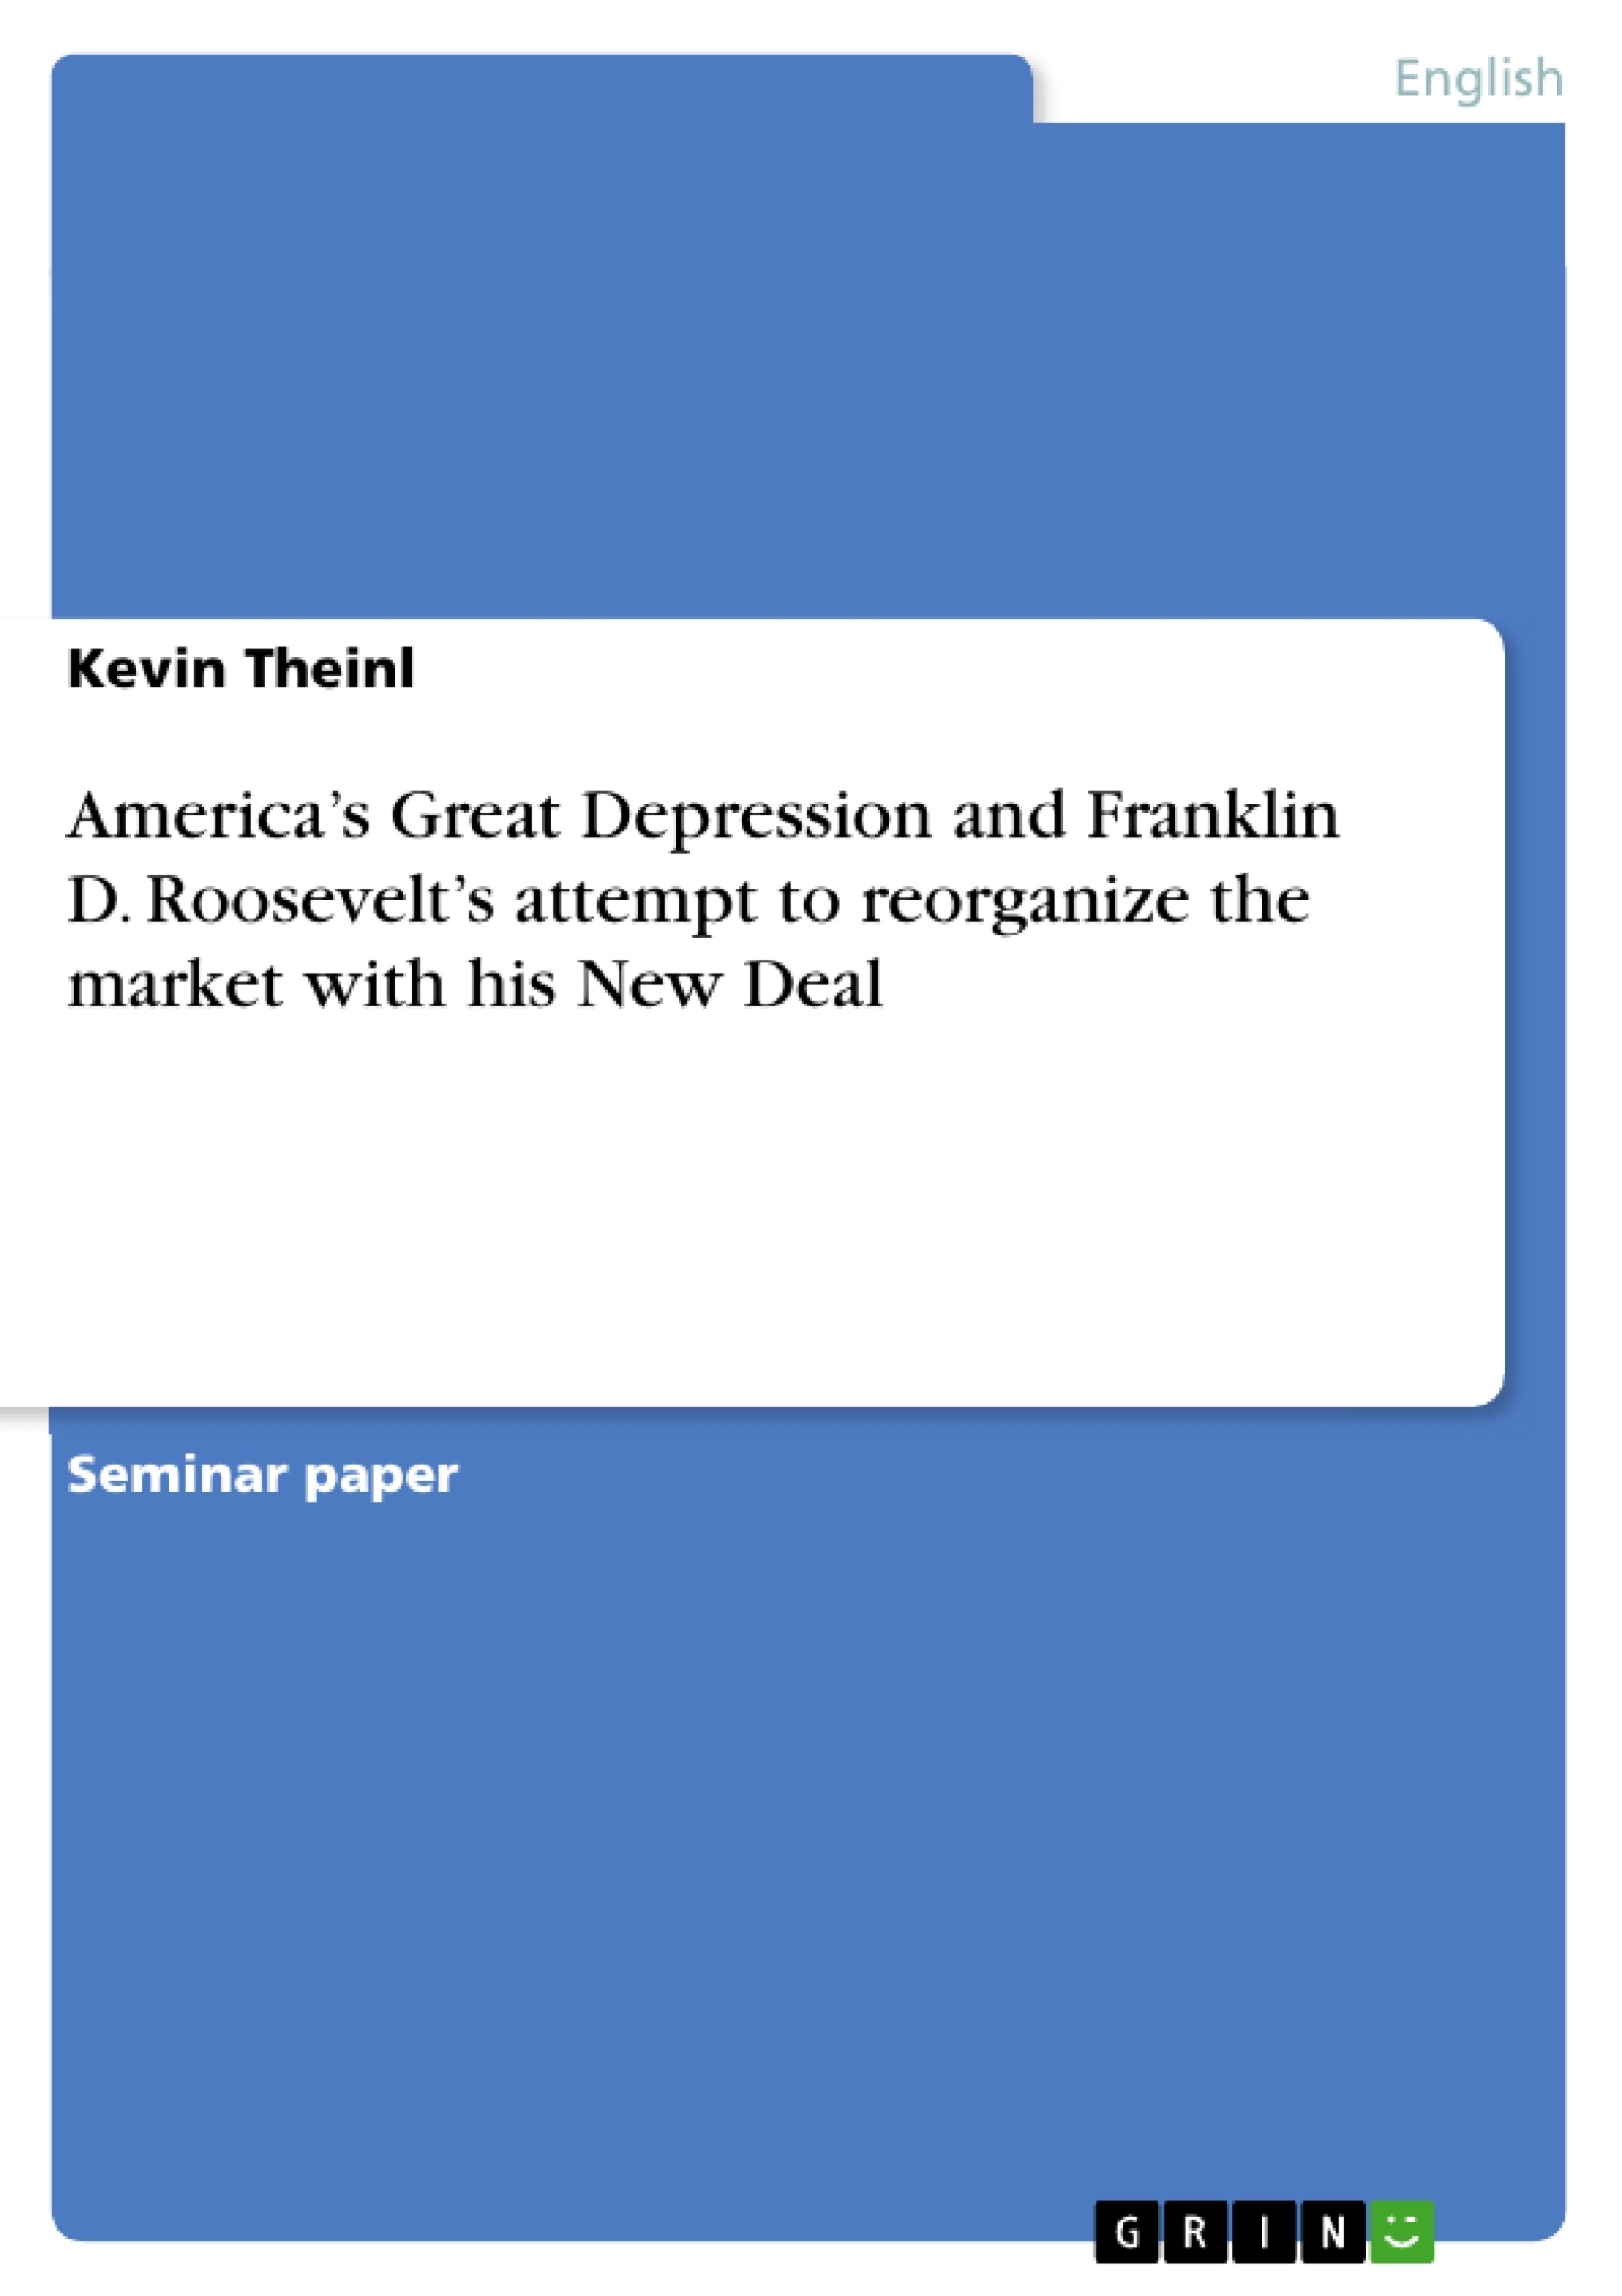 Title: America’s Great Depression and Franklin D. Roosevelt’s attempt to reorganize the market with his New Deal